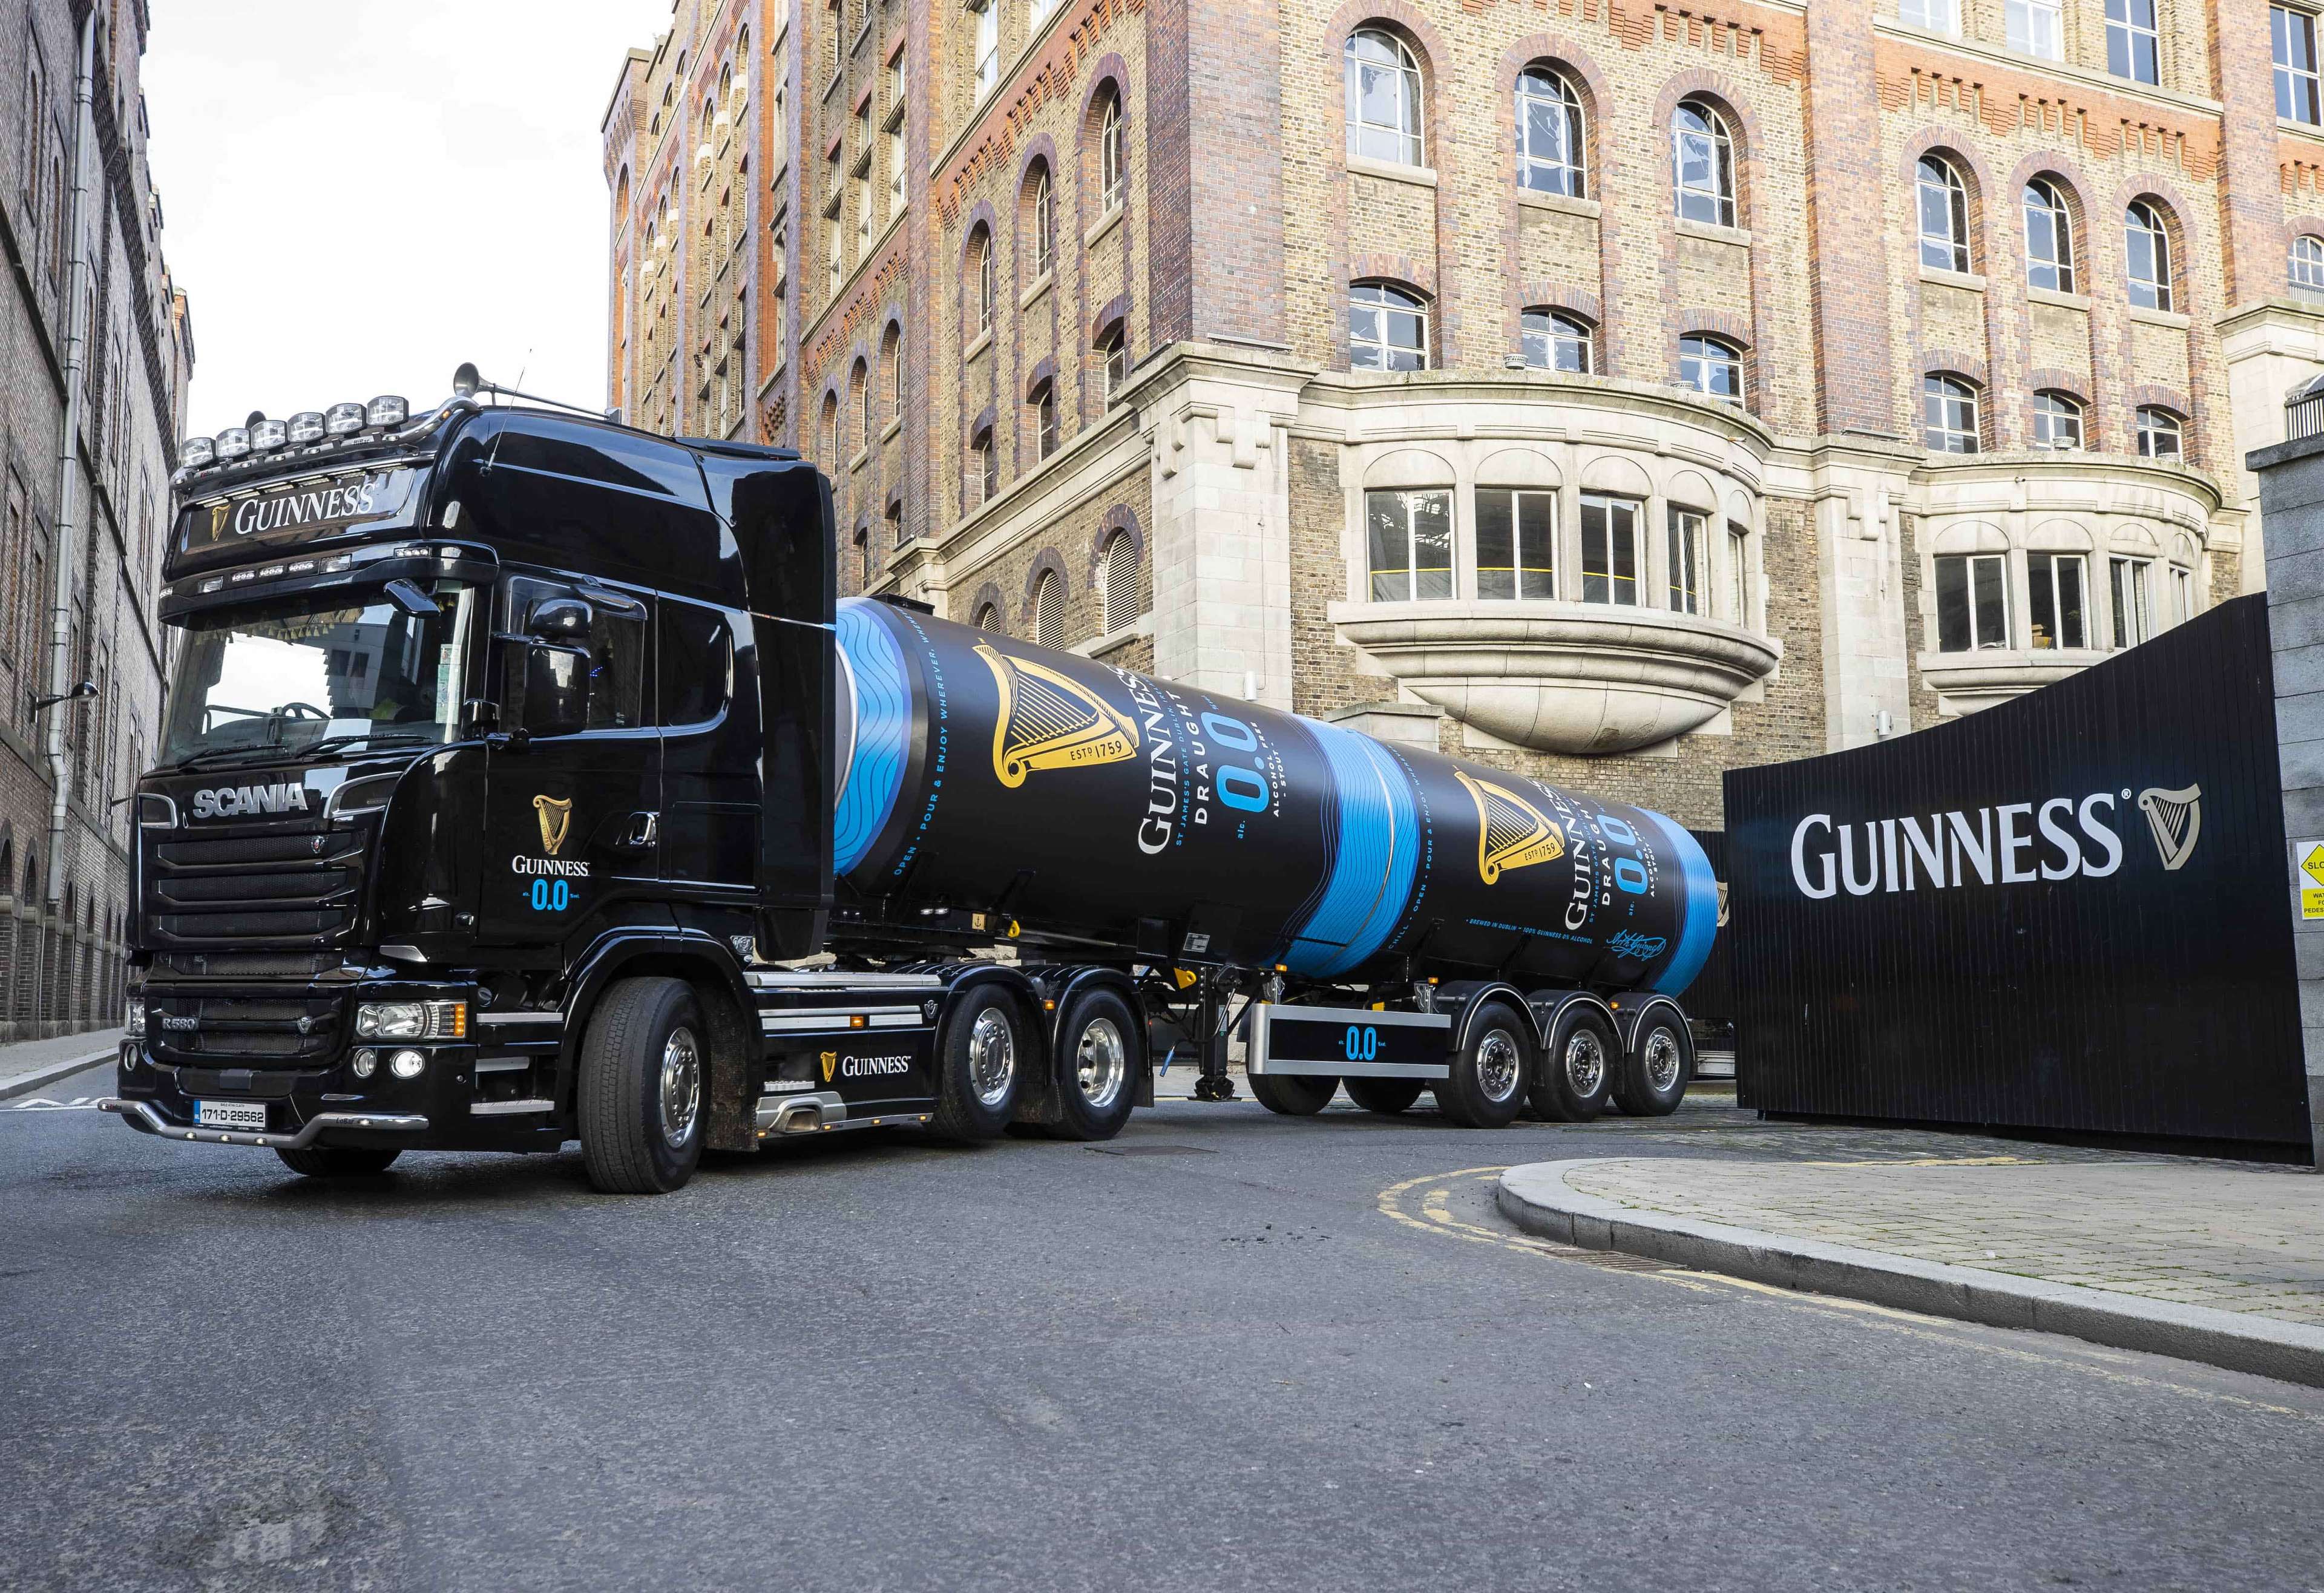 Guinness introduces ‘Guinness 0.0’, the Guinness w